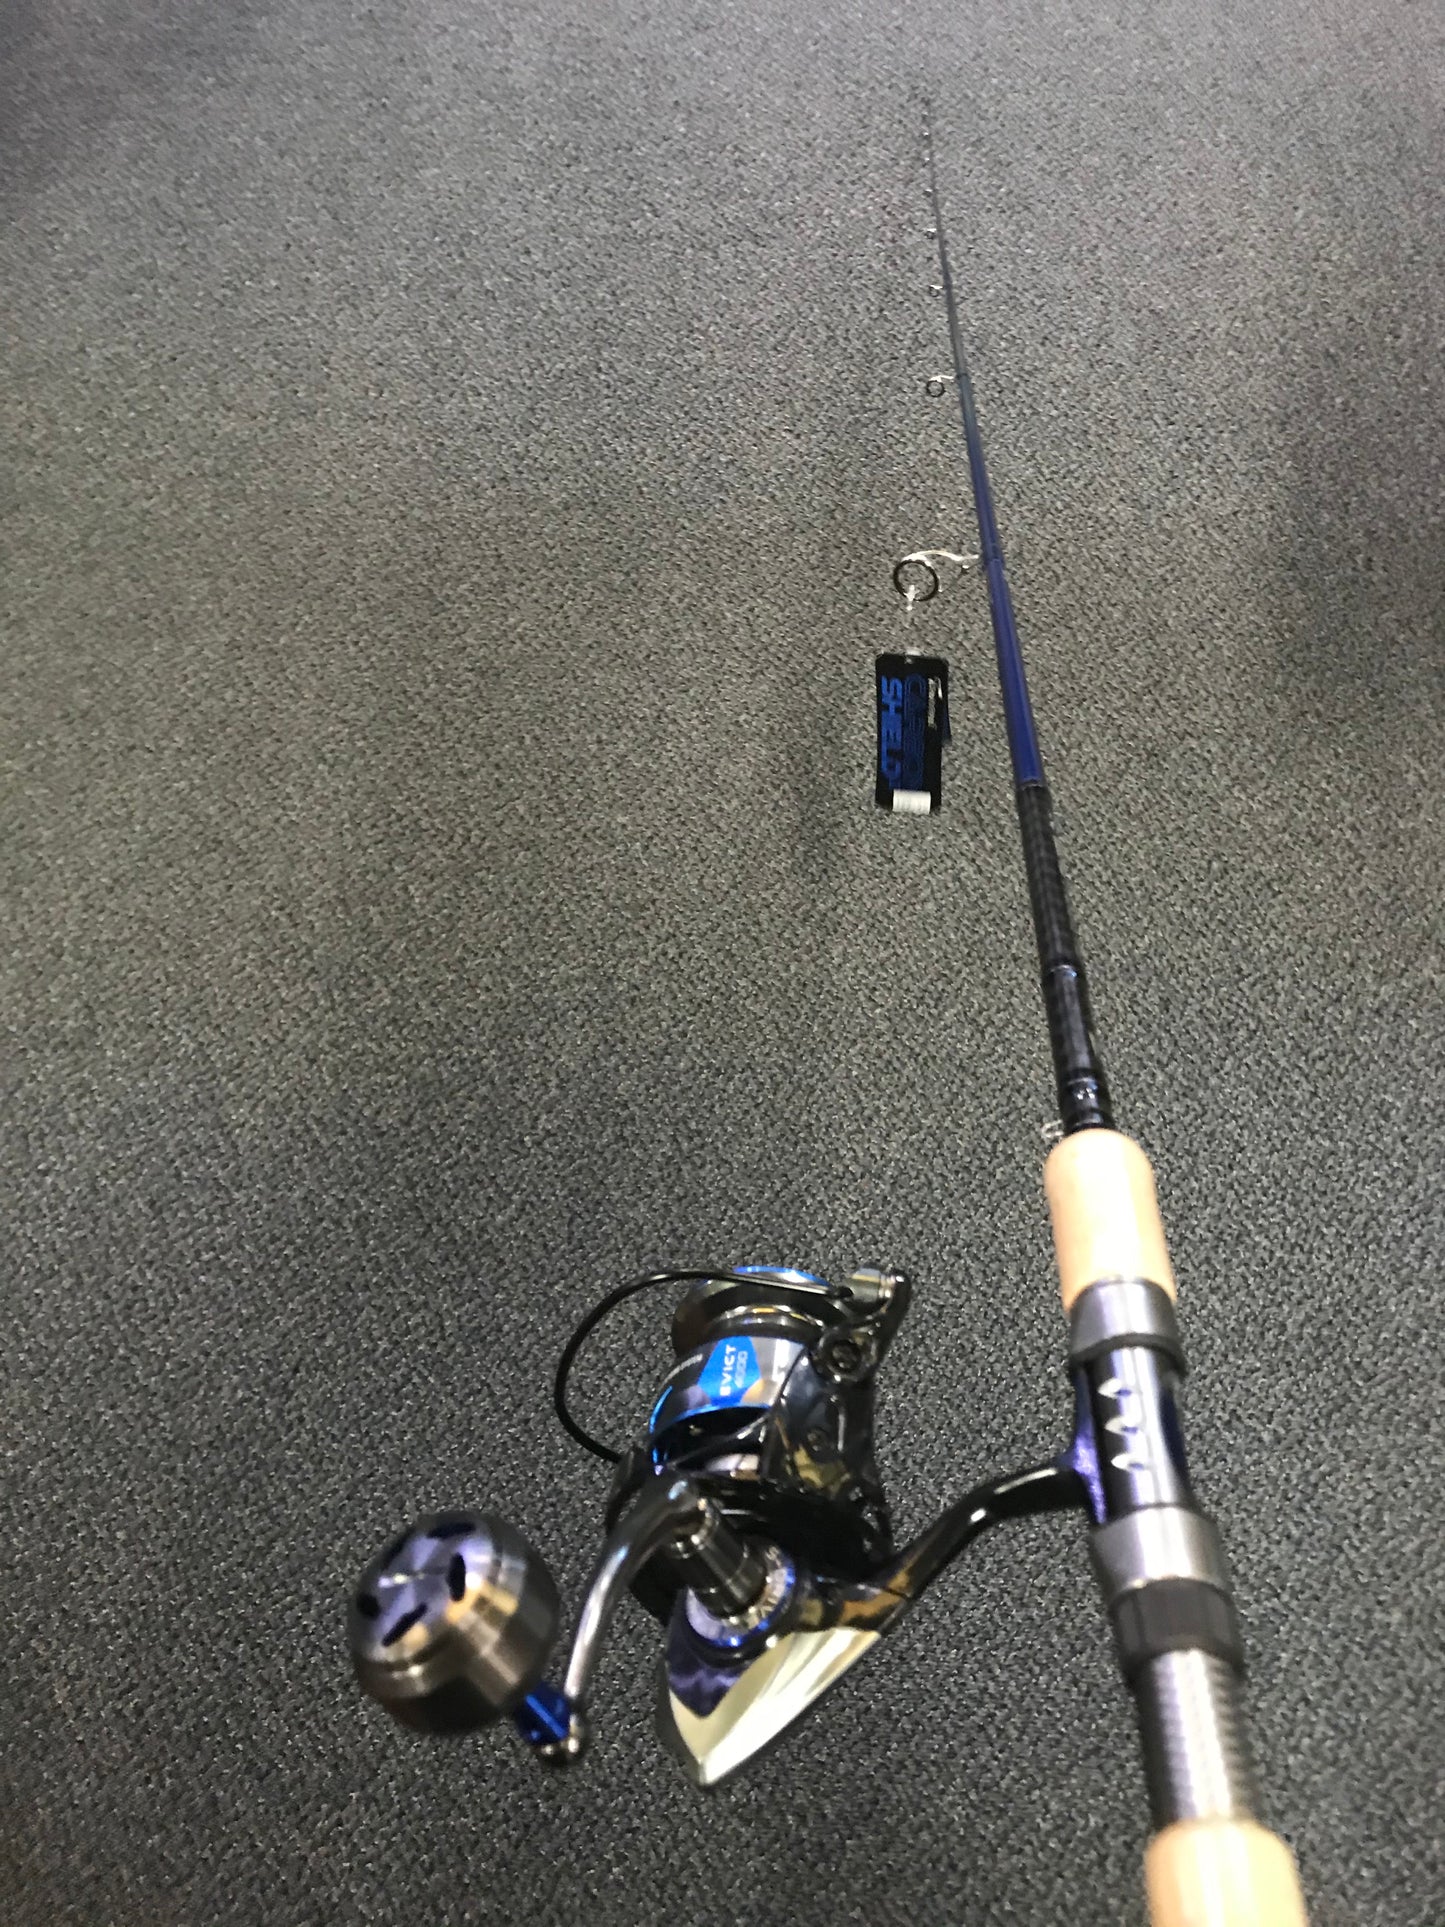 Tsunami Evict 4000 - Carbon Shield 7'6 MH Spinning Reel Combo - Dogfish Tackle & Marine